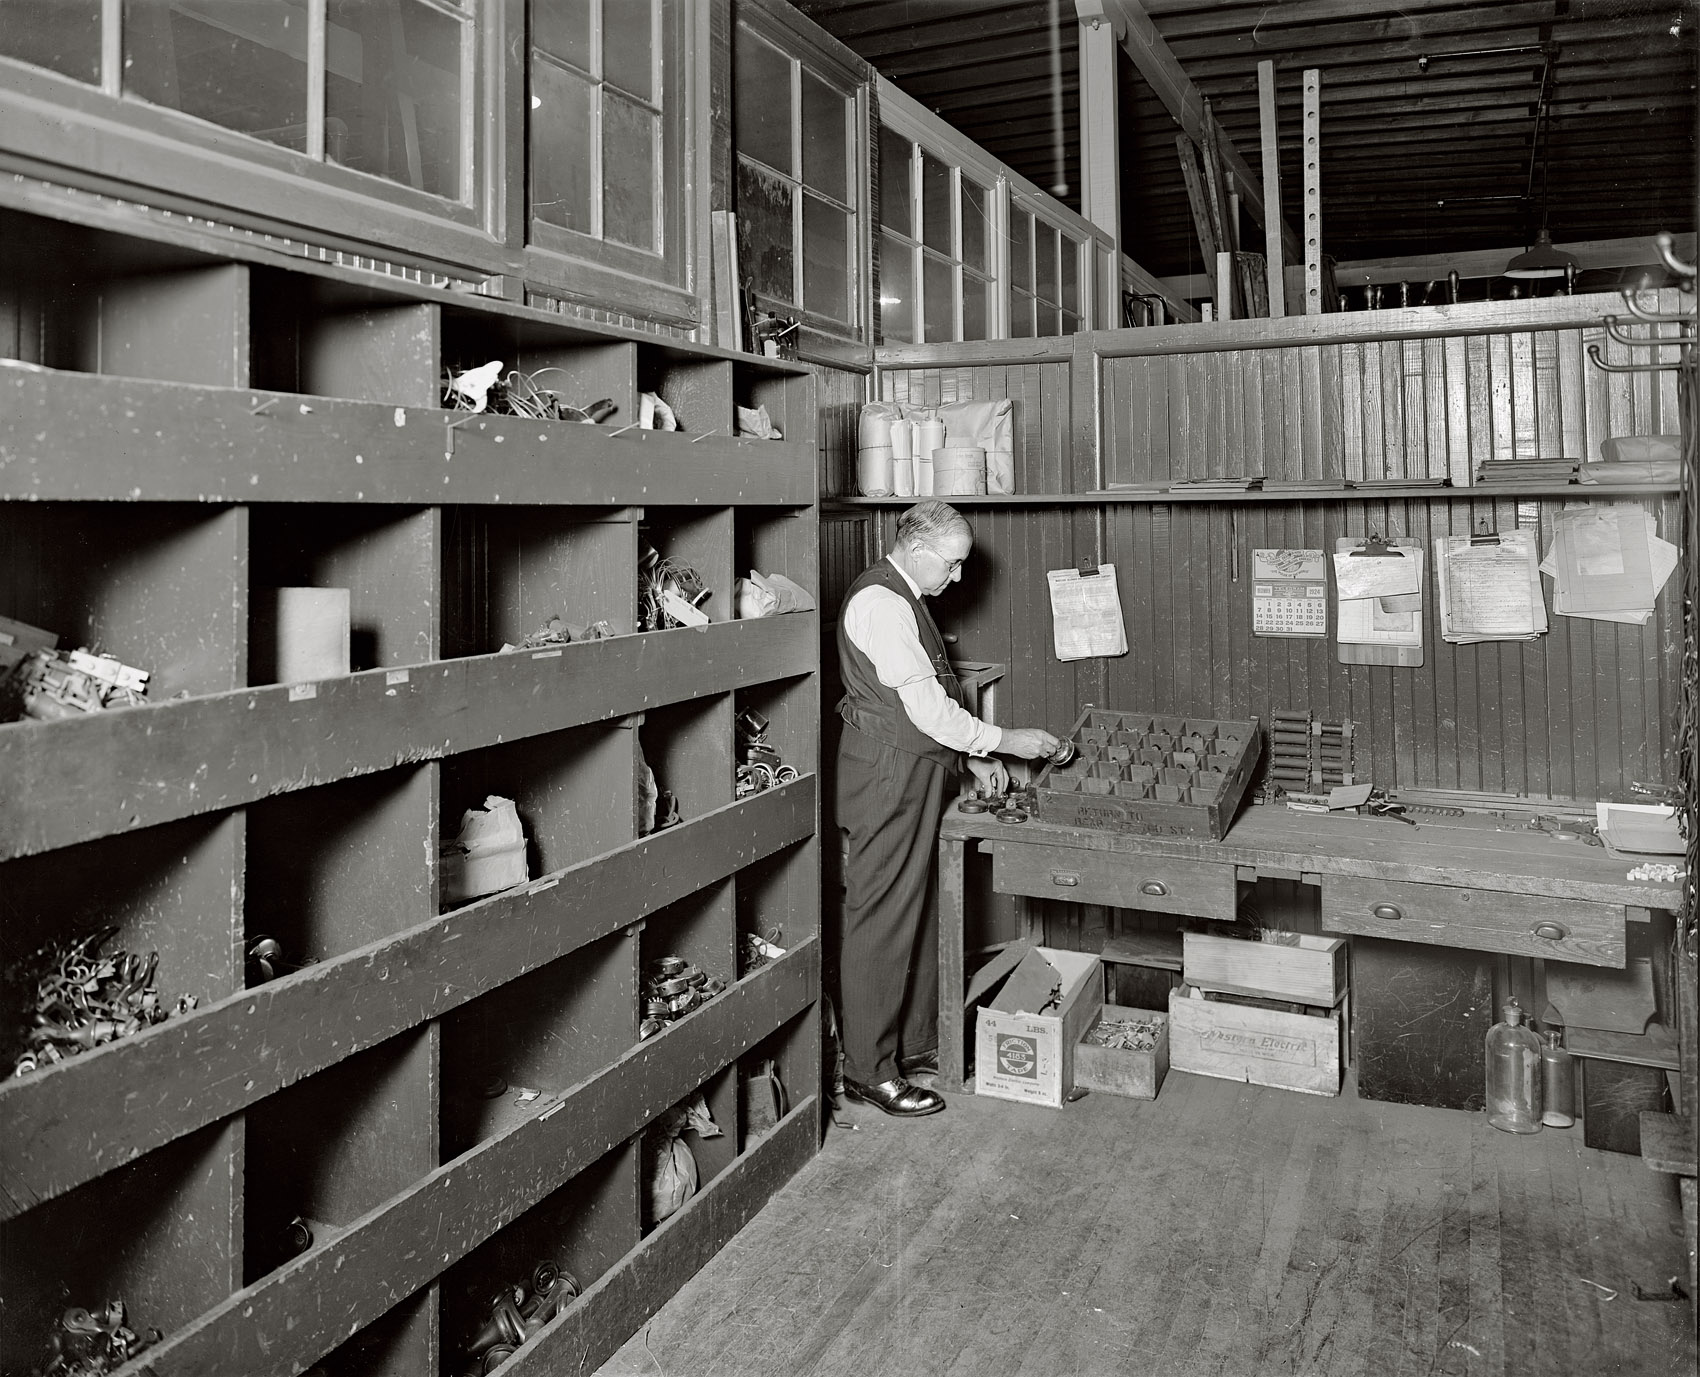 Another behind-the-scenes look at the workings of the Chesapeake & Potomac Telephone Company. The calendar is for December 1924. View full size.